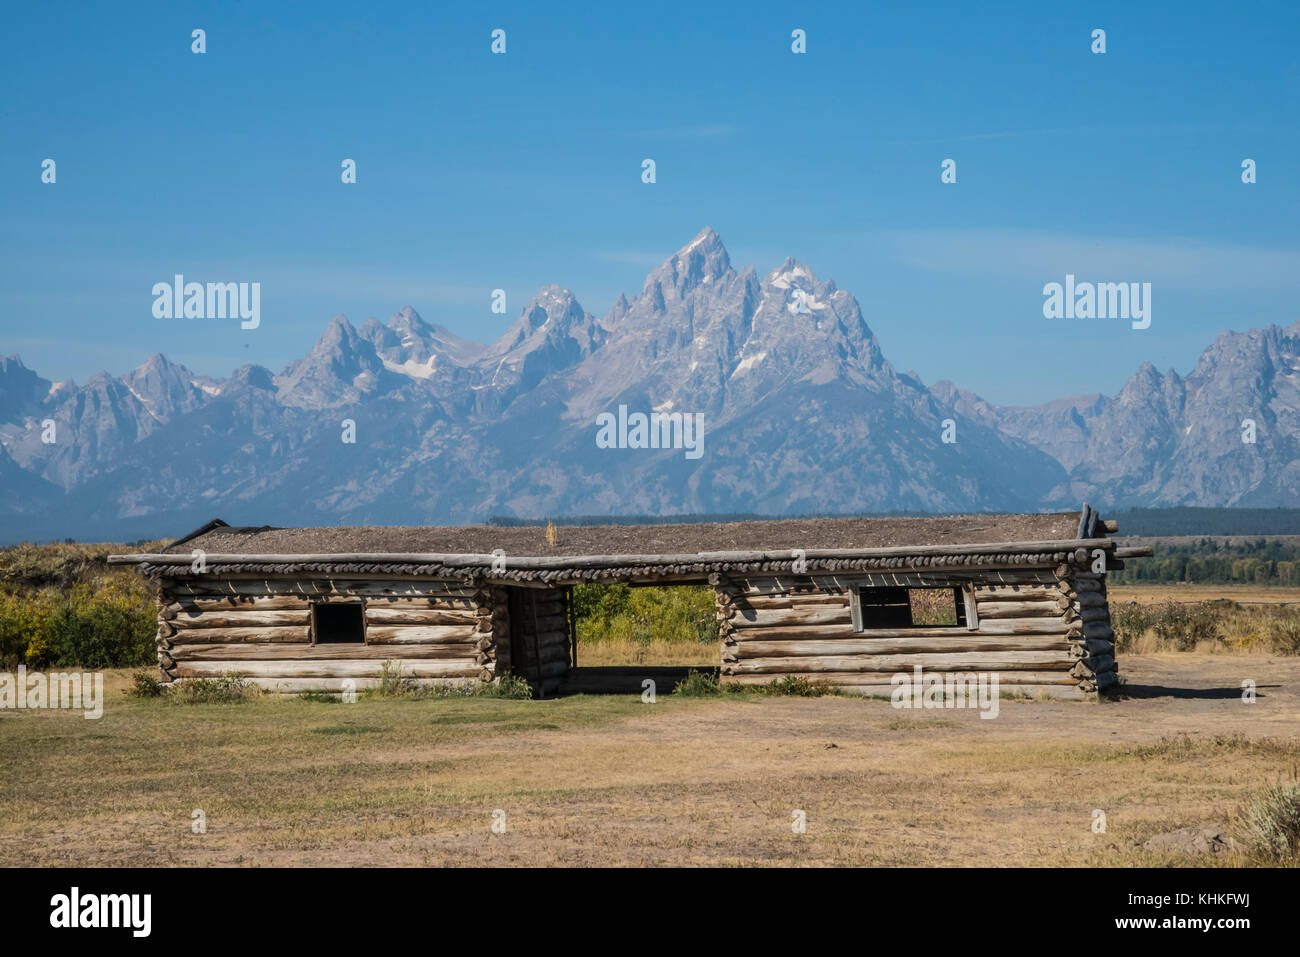 Cunningham cabin and ranch overlooking the Grand Teton National Park, Wyoming Stock Photo